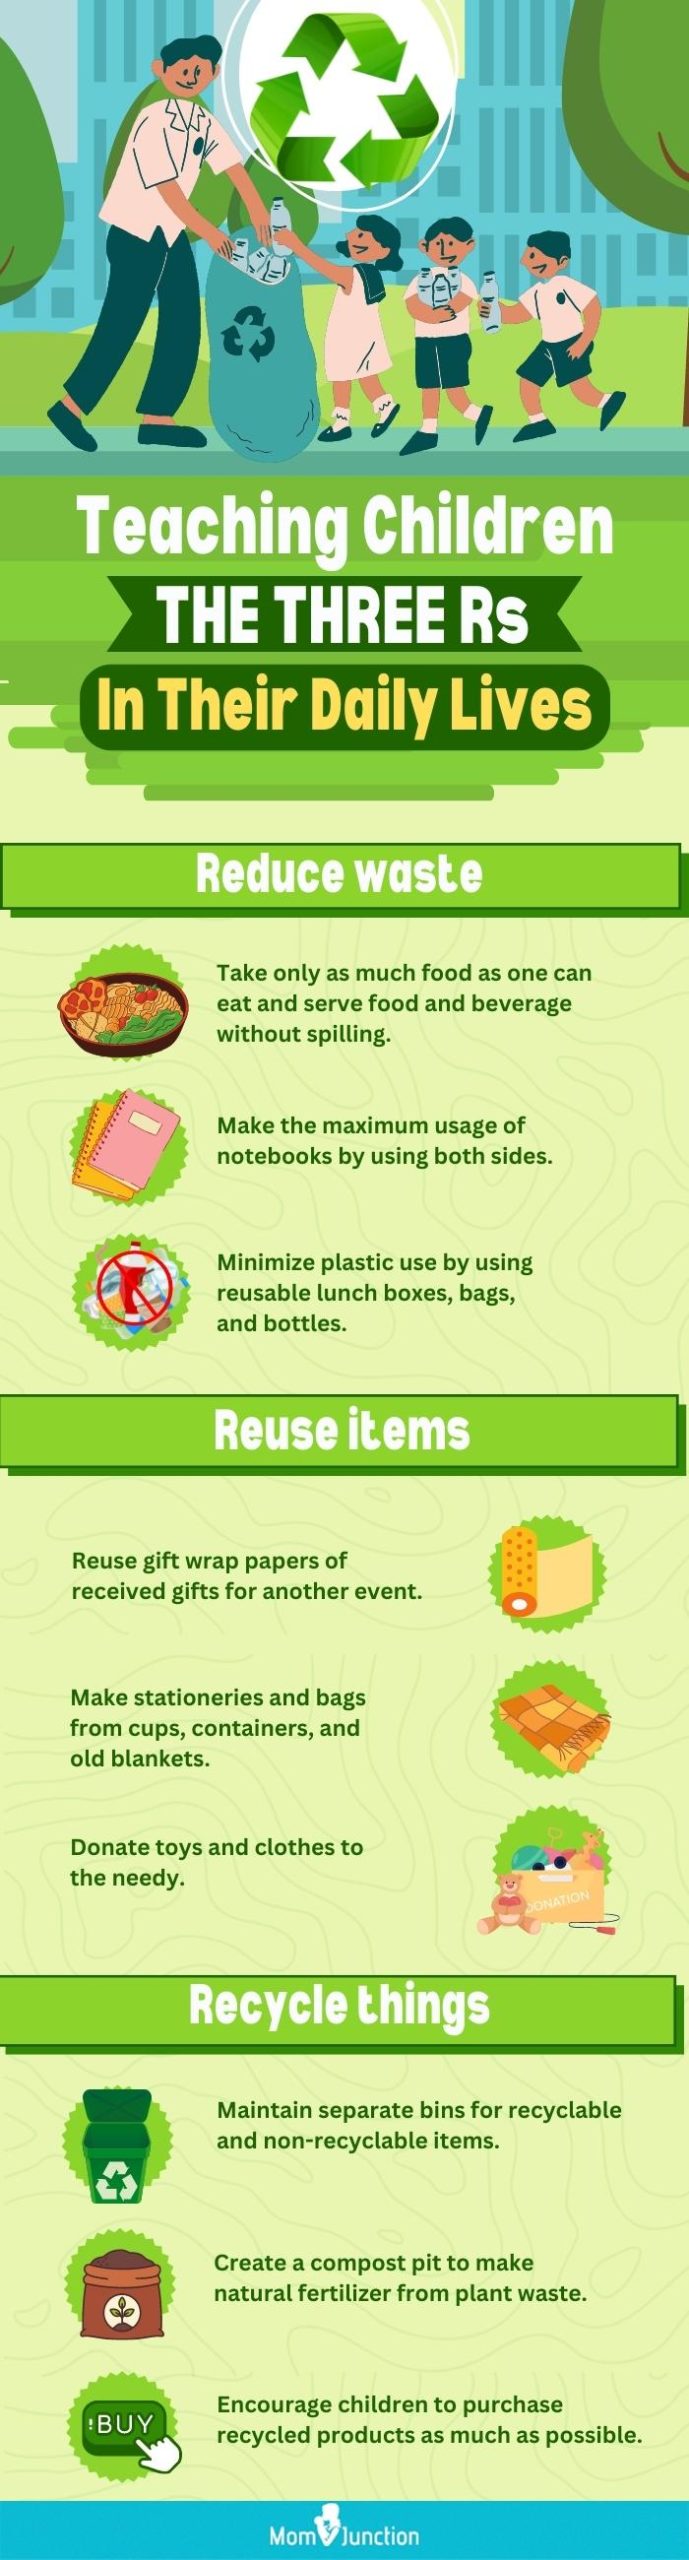 easy ways children can reduce reuse and recycle (infographic)